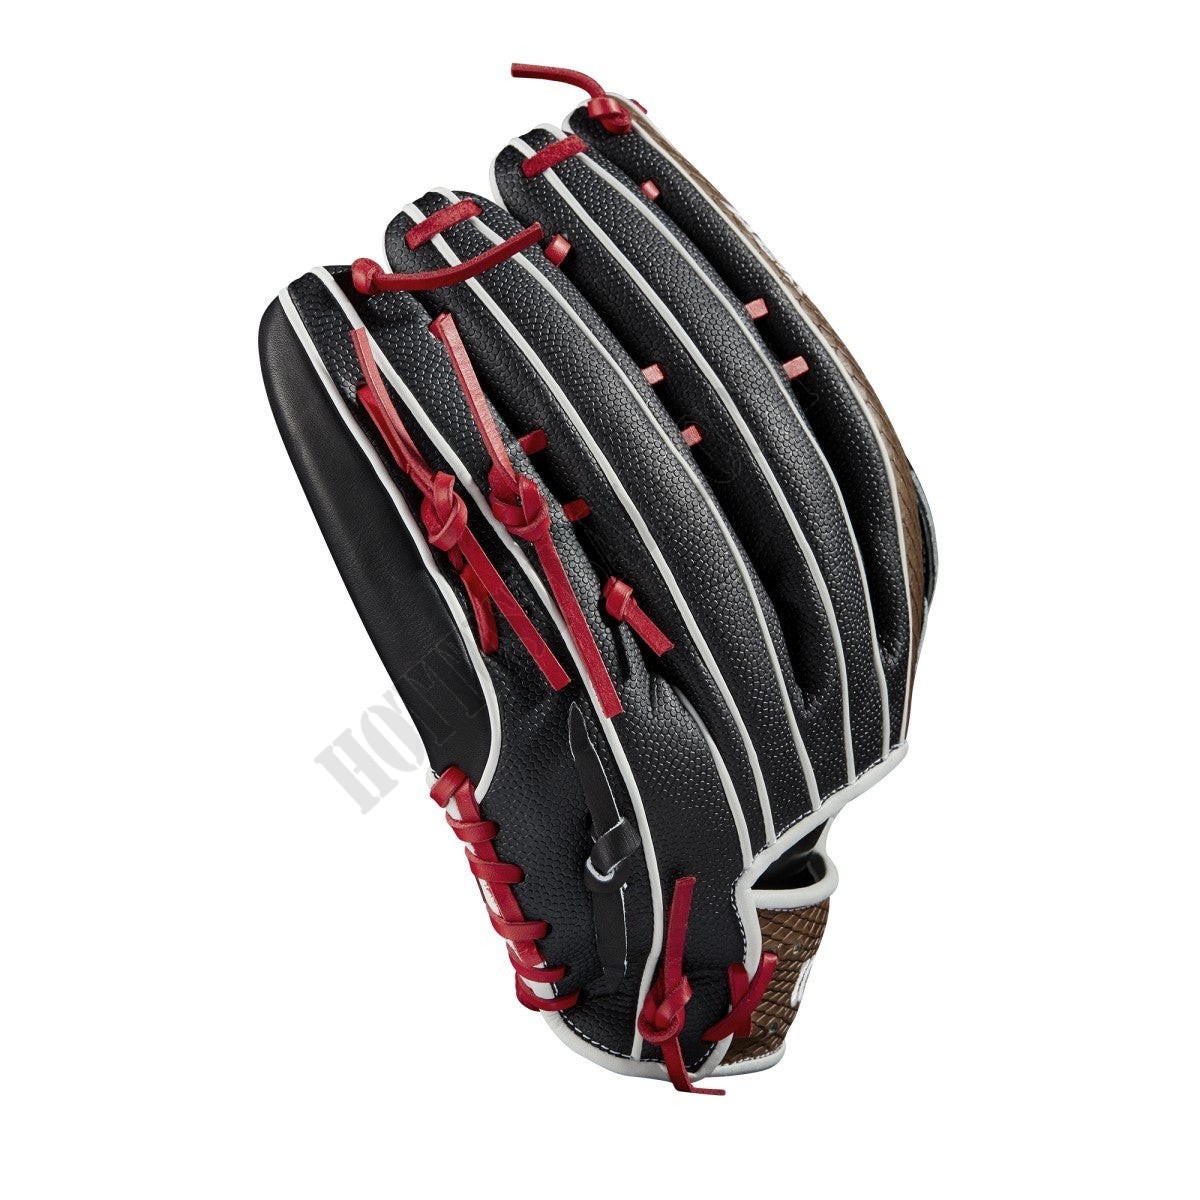 2021 A2K 1799SS 12.75" Outfield Baseball Glove ● Wilson Promotions - -4